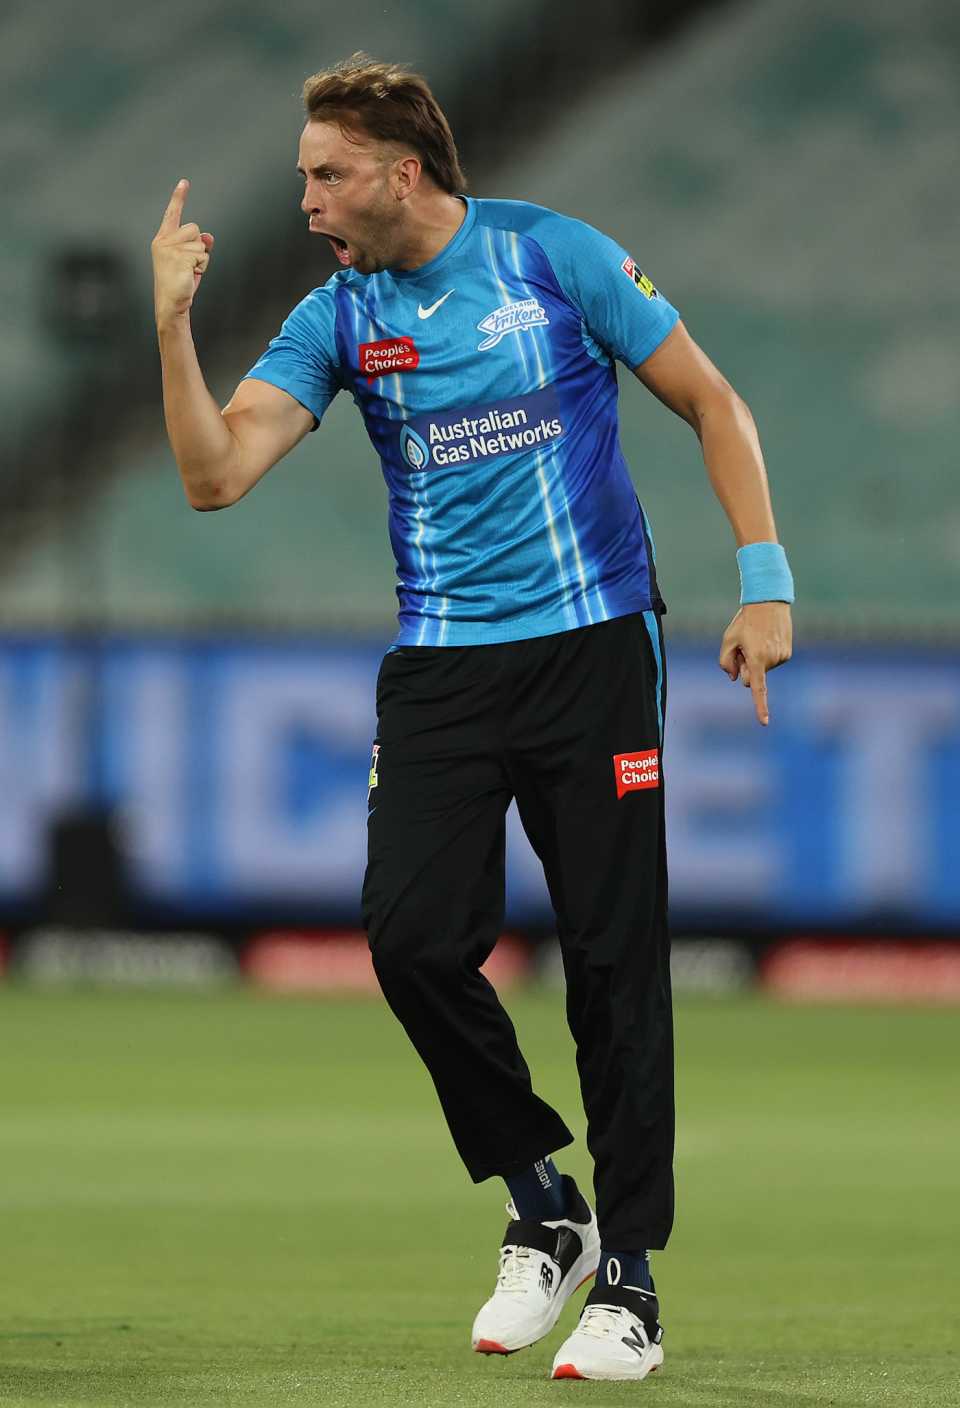 Harry Conway bowled an excellent last over to take the Strikers home, Sydney Thunder vs Adelaide strikers, BBL 2021-22 Knockout, Melbourne, January 23, 2022